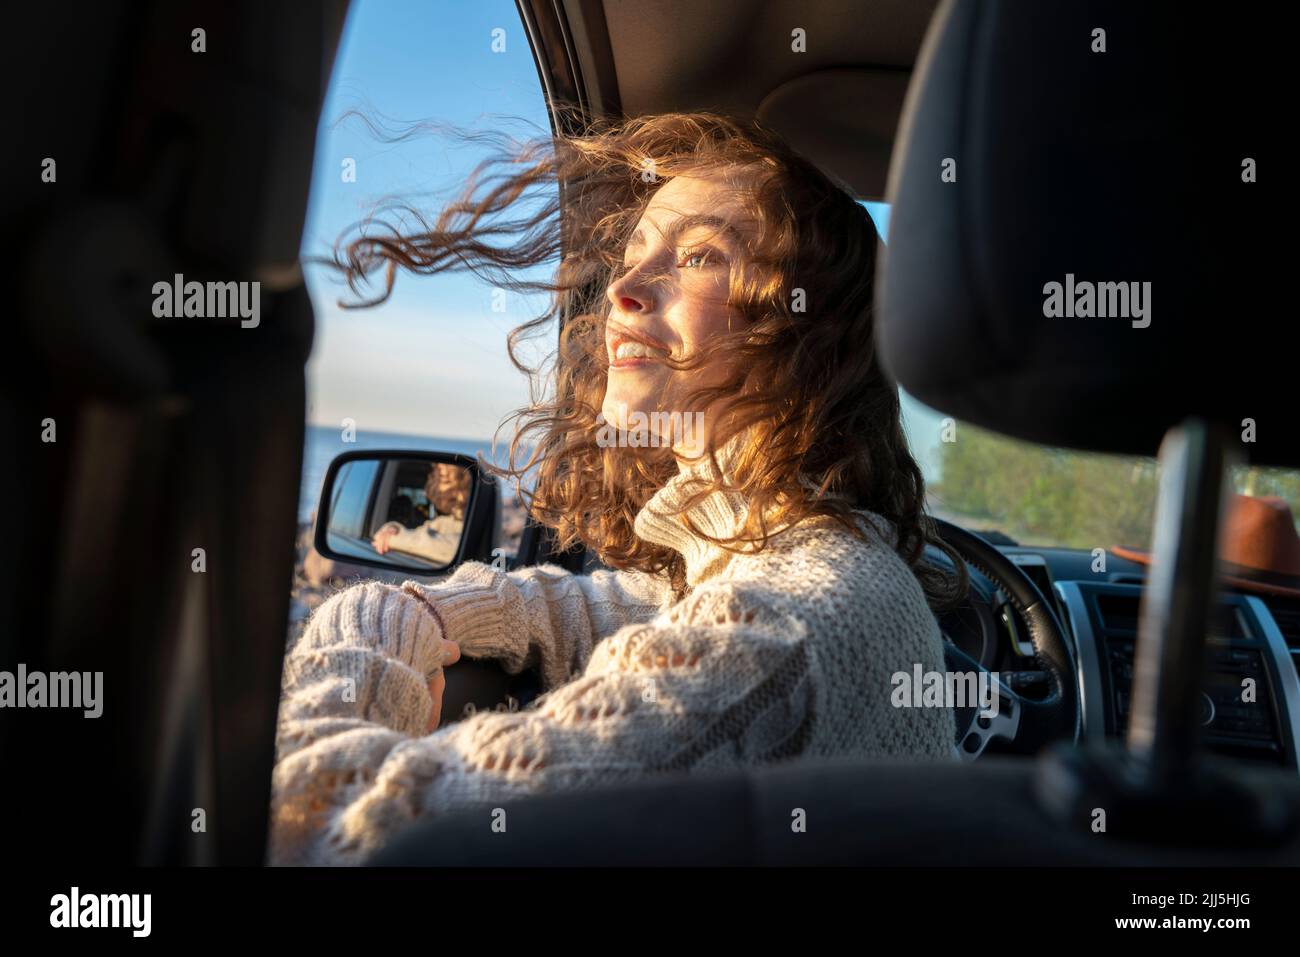 Smiling woman with tousled hair sitting in car Stock Photo